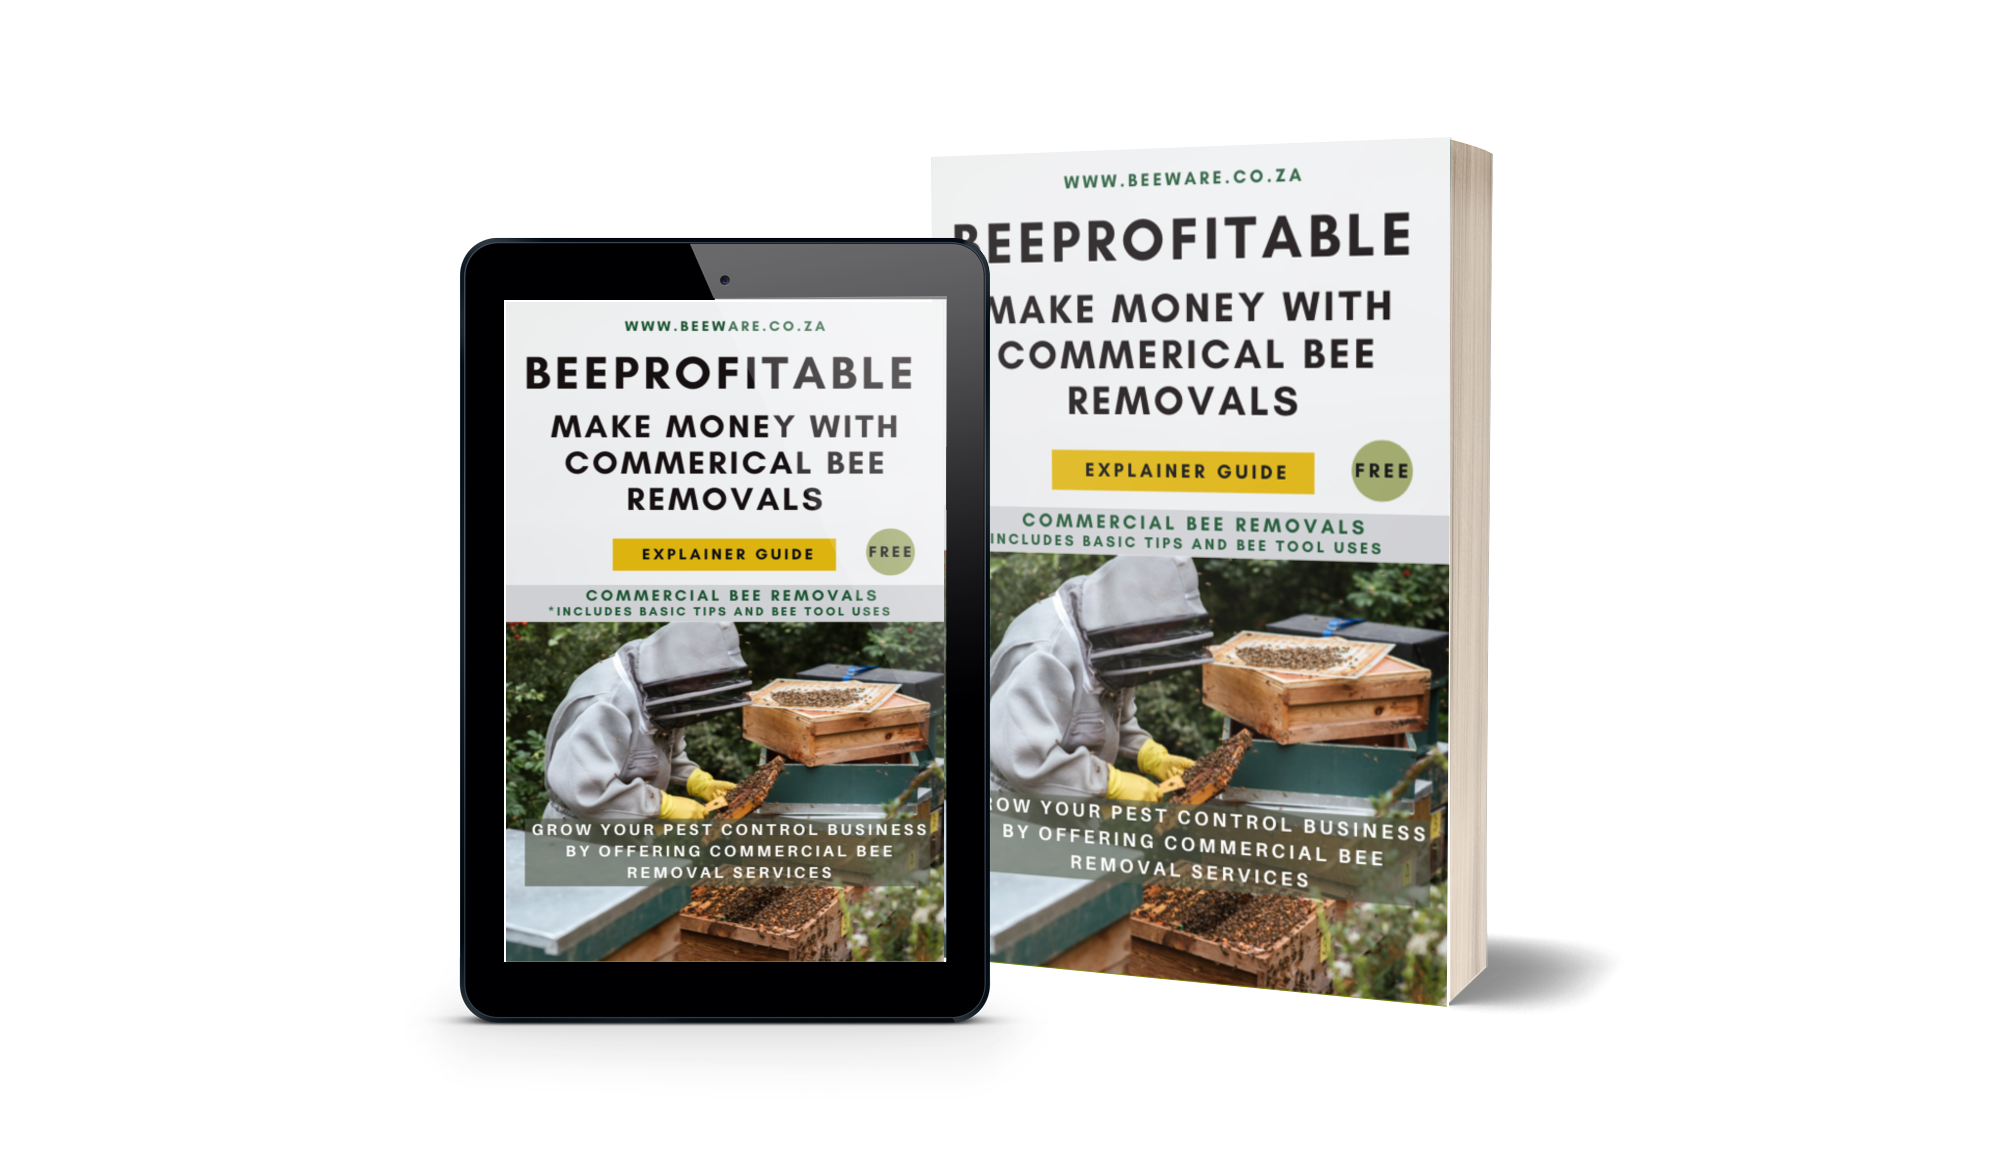 http://www.beeware.co.za/removals/beeprofitablecommercial.pdf